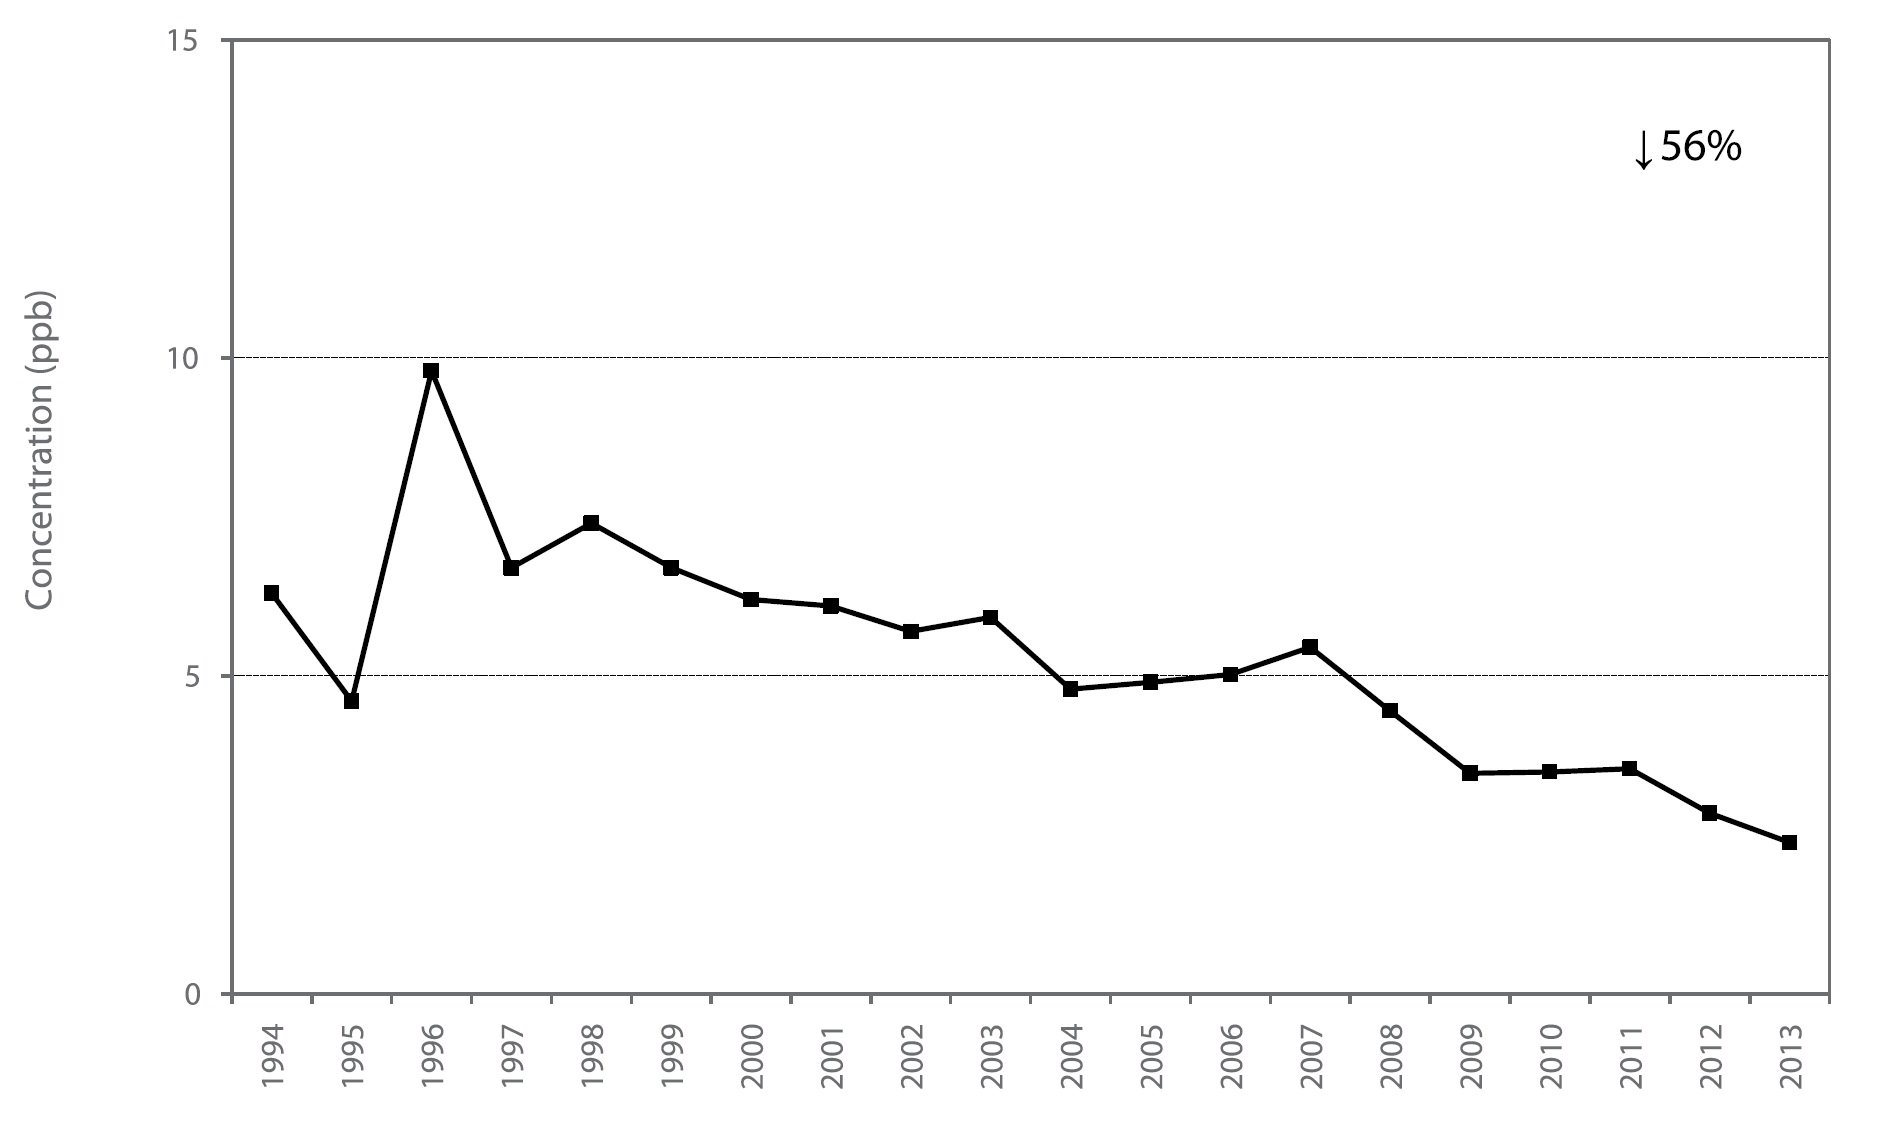 Figure A41 is a line chart displaying the sulphur dioxide annual mean at Windsor Downtown from 1994 to 2013. Over this 20-year period sulphur dioxide decreased 56%.